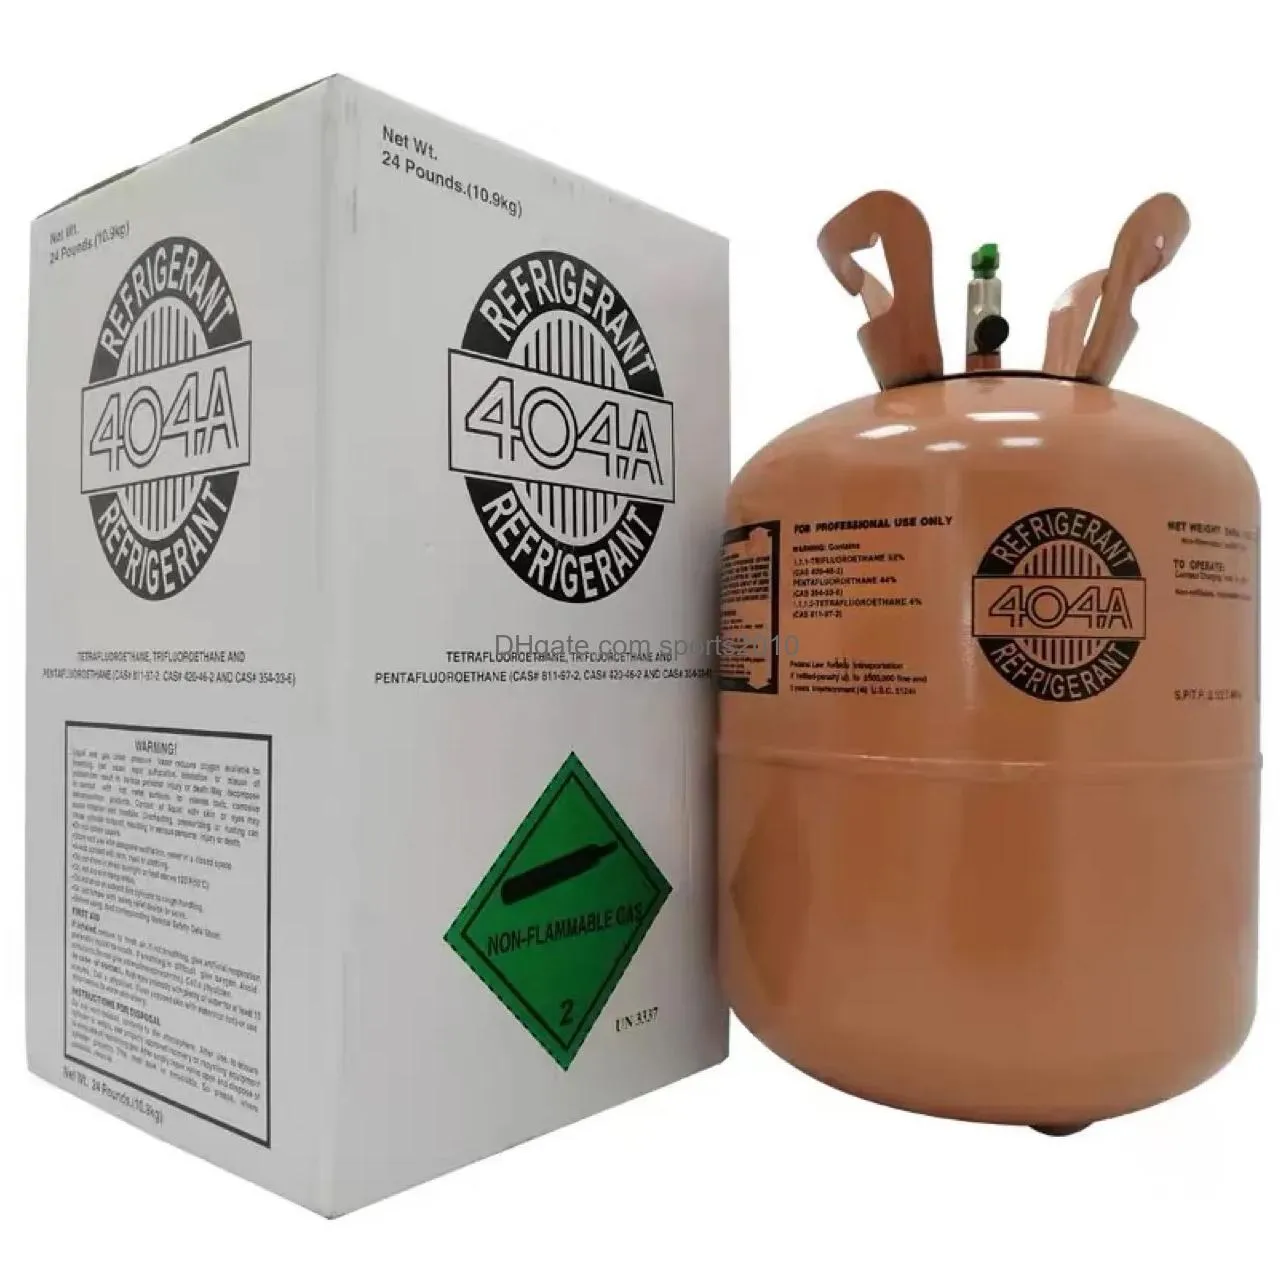 Refrigerators & Freezers Freon Steel Cylinder Packaging R404 30Lb Tank Refrigerant For Air Ship Conditioners Drop Delivery Home Garden Dh5Gs